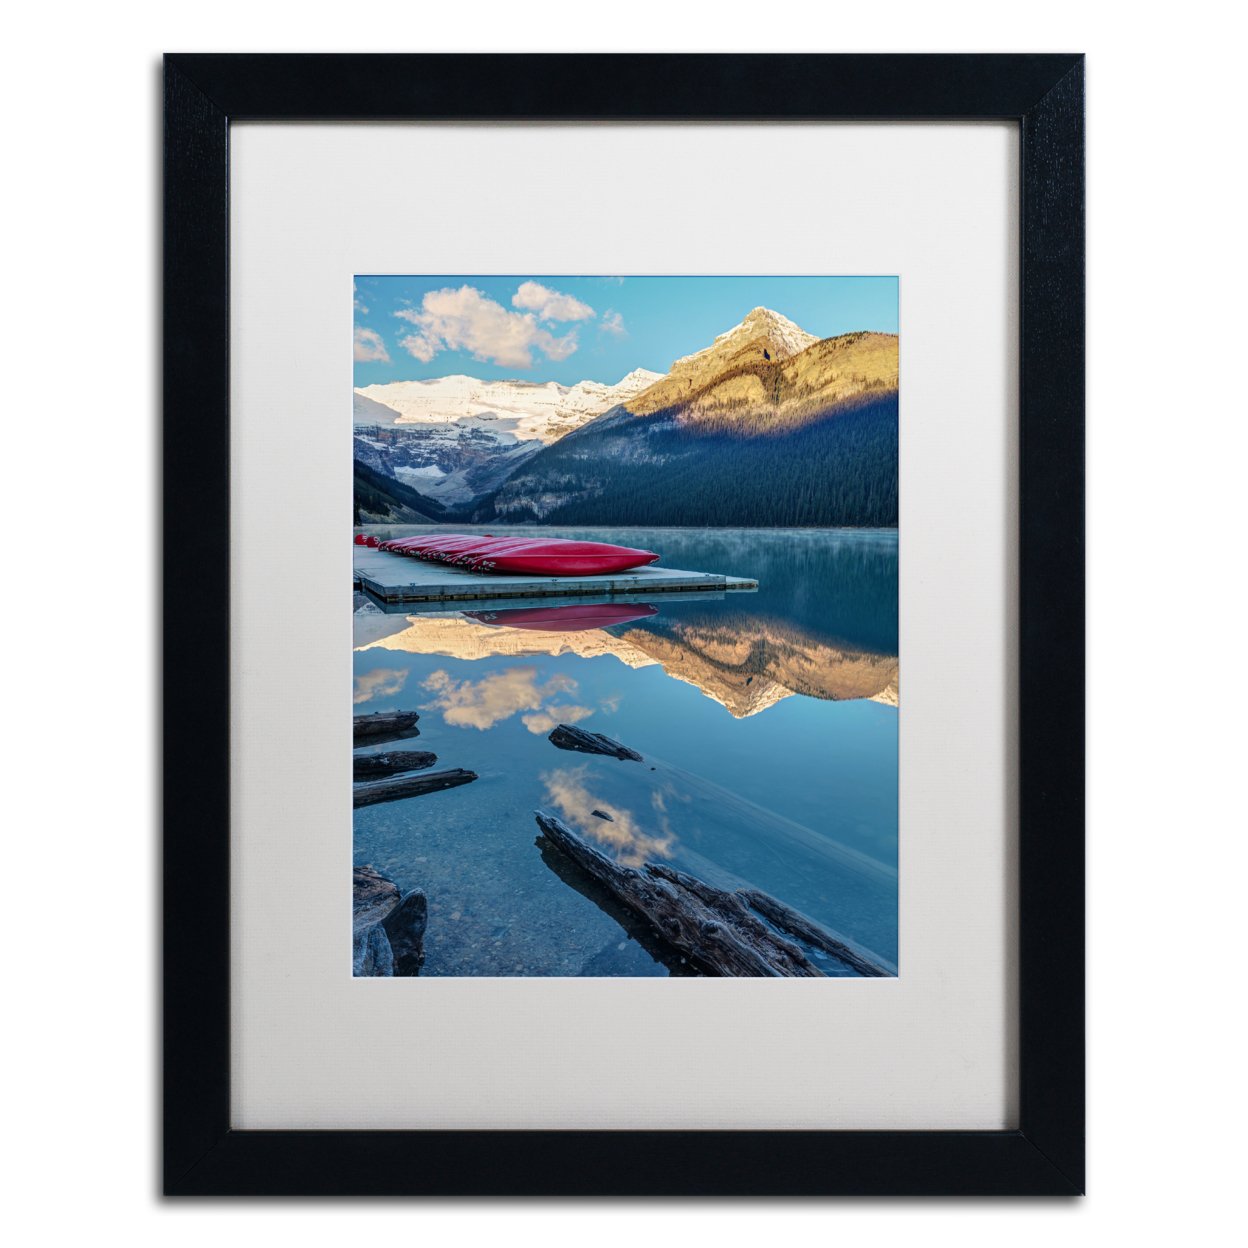 Pierre Leclerc 'Lake Louise Canoes' Black Wooden Framed Art 18 X 22 Inches